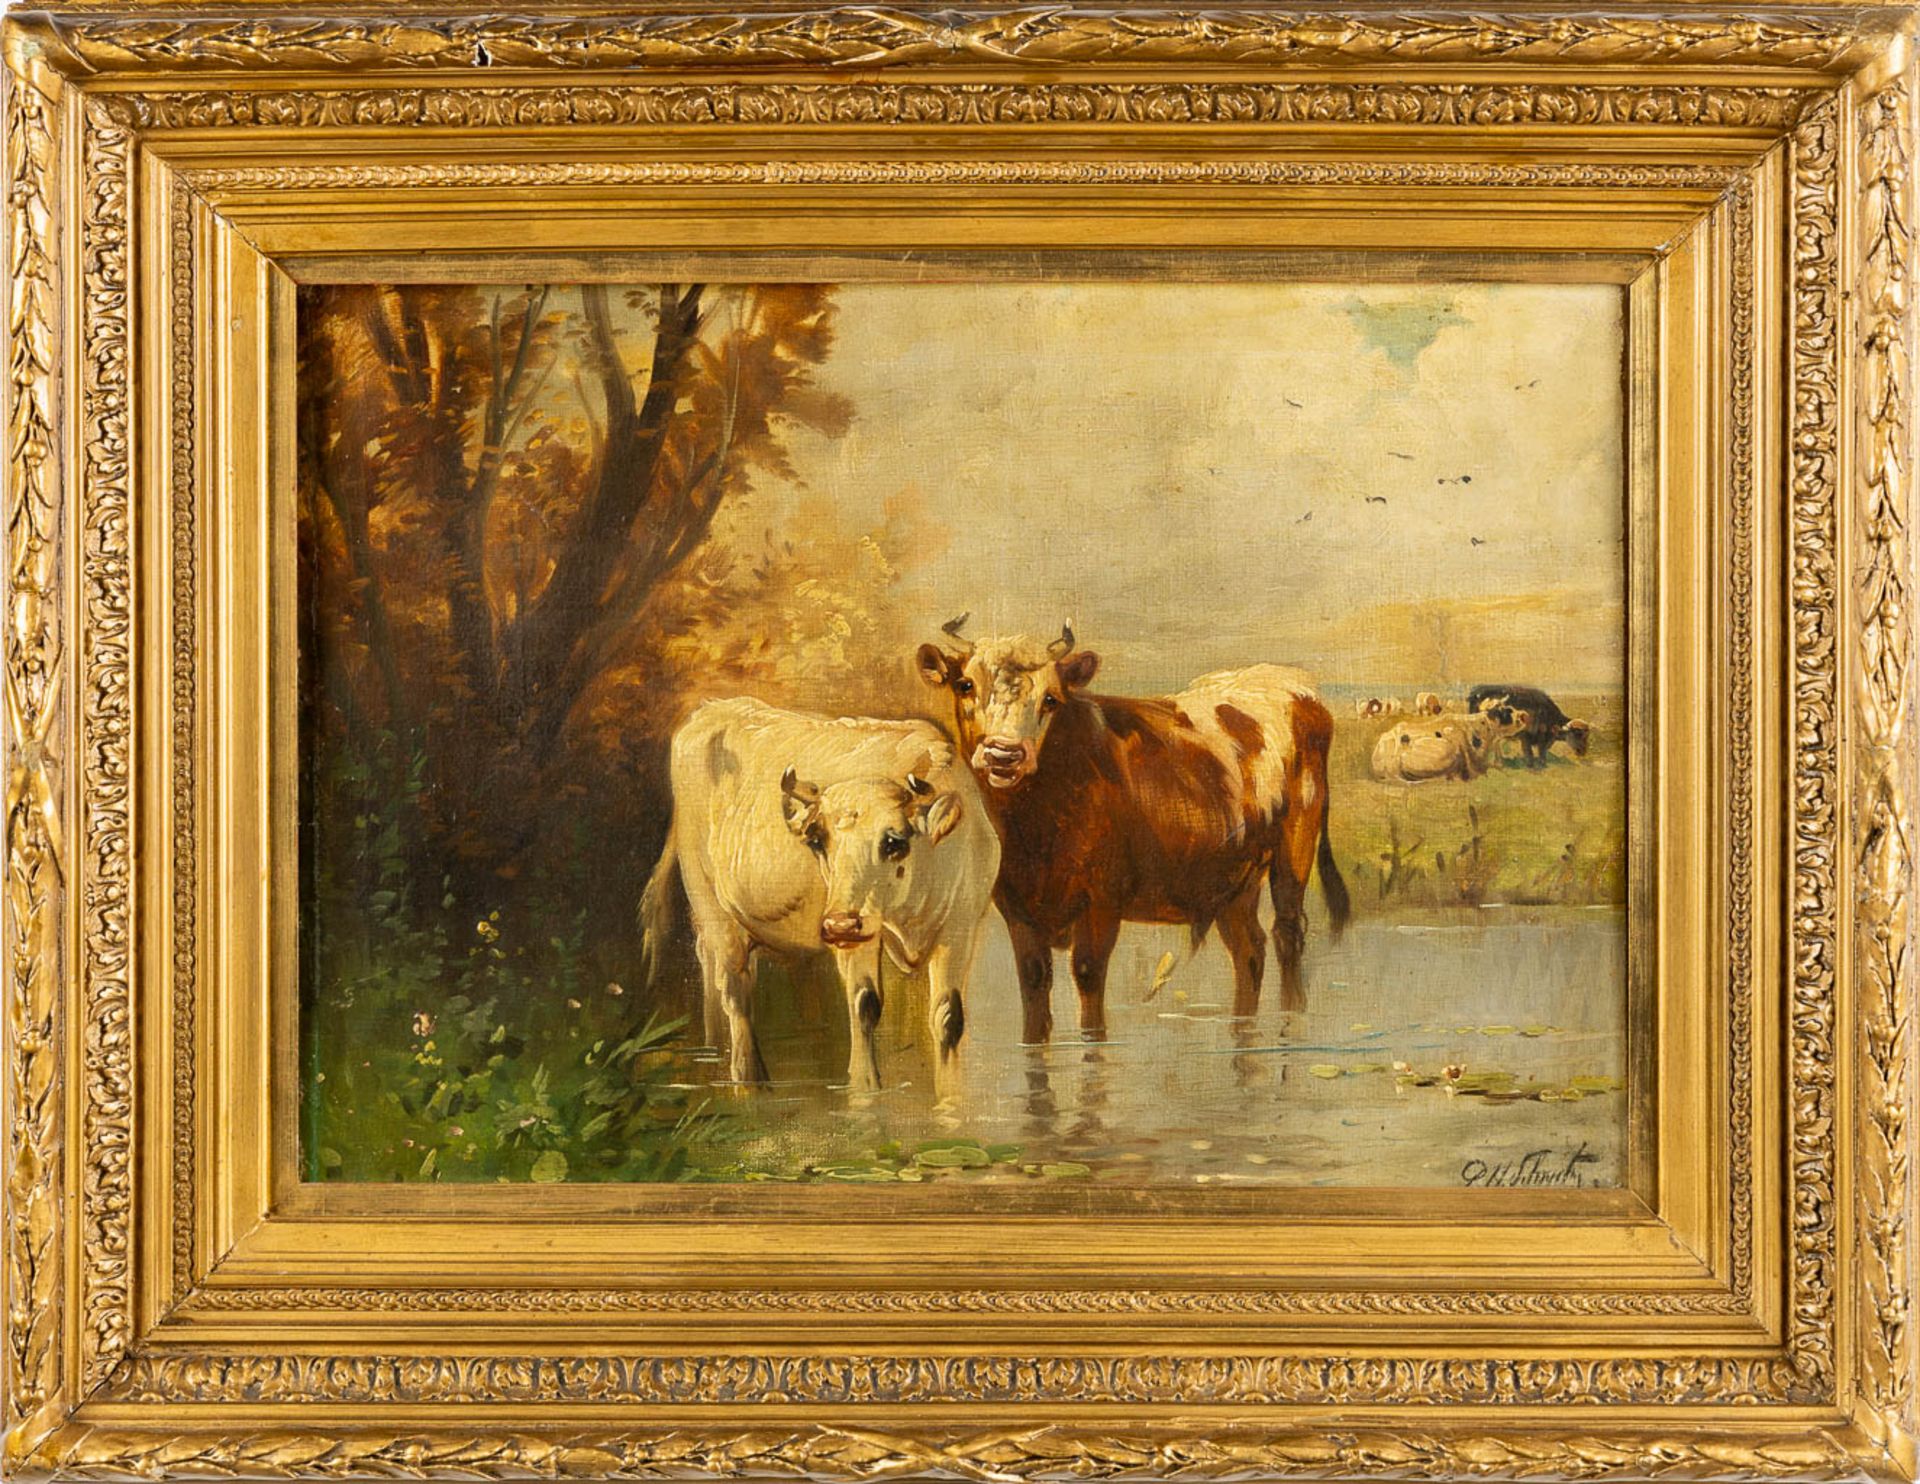 Paul SCHOUTEN (1860-1922) 'Cows in a pond' oil on canvas. (W:62 x H:45 cm) - Image 3 of 10